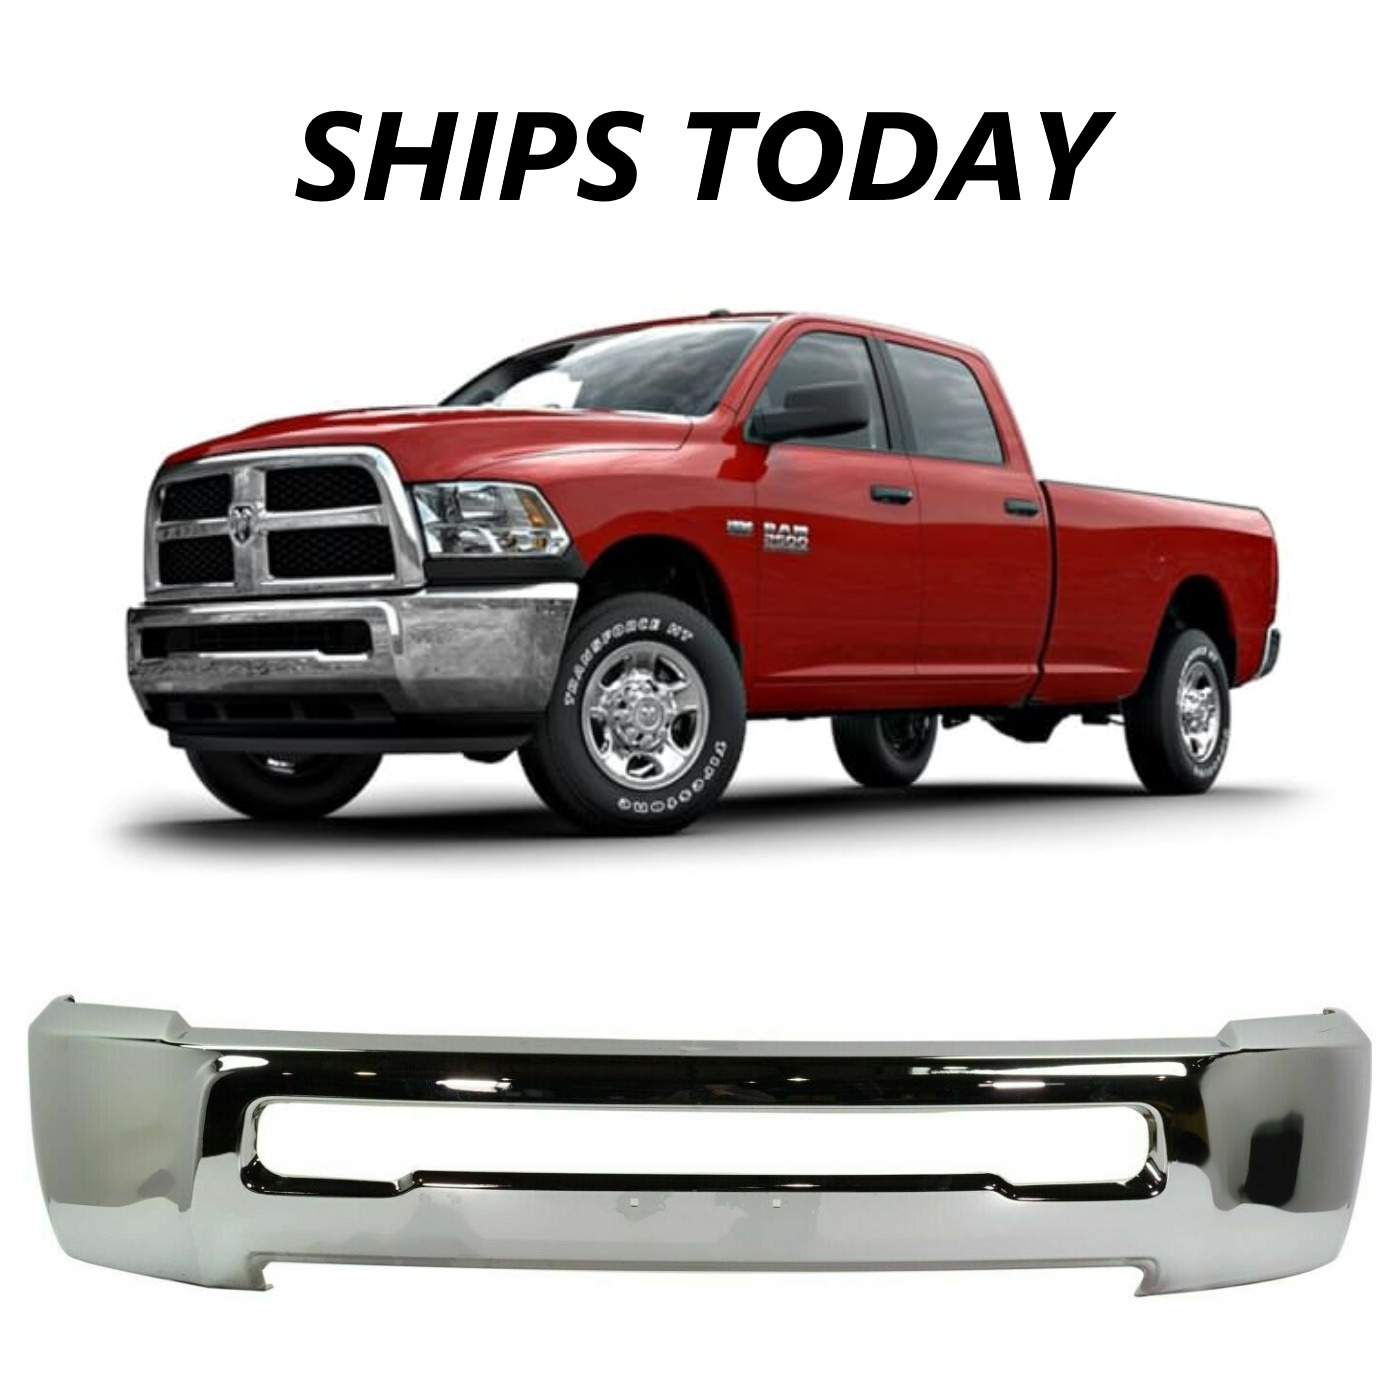 NEW Chrome Front Bumper For 2010-2018 Ram 2500 3500 Without Fogs SHIPS TODAY